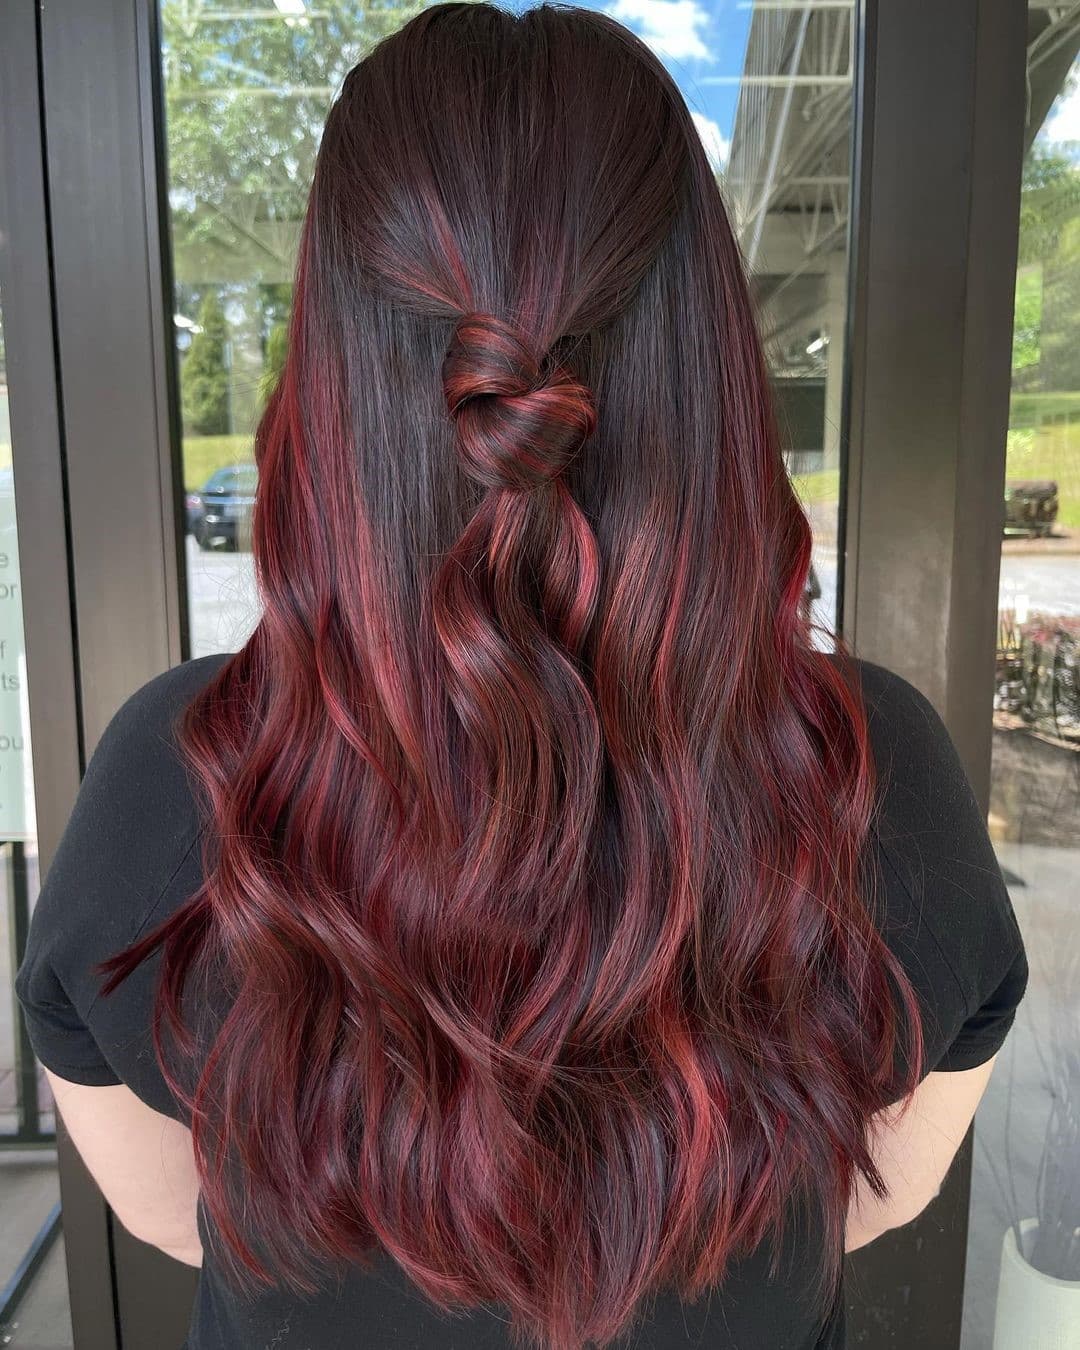 Cherry Coke Hue with Highlights